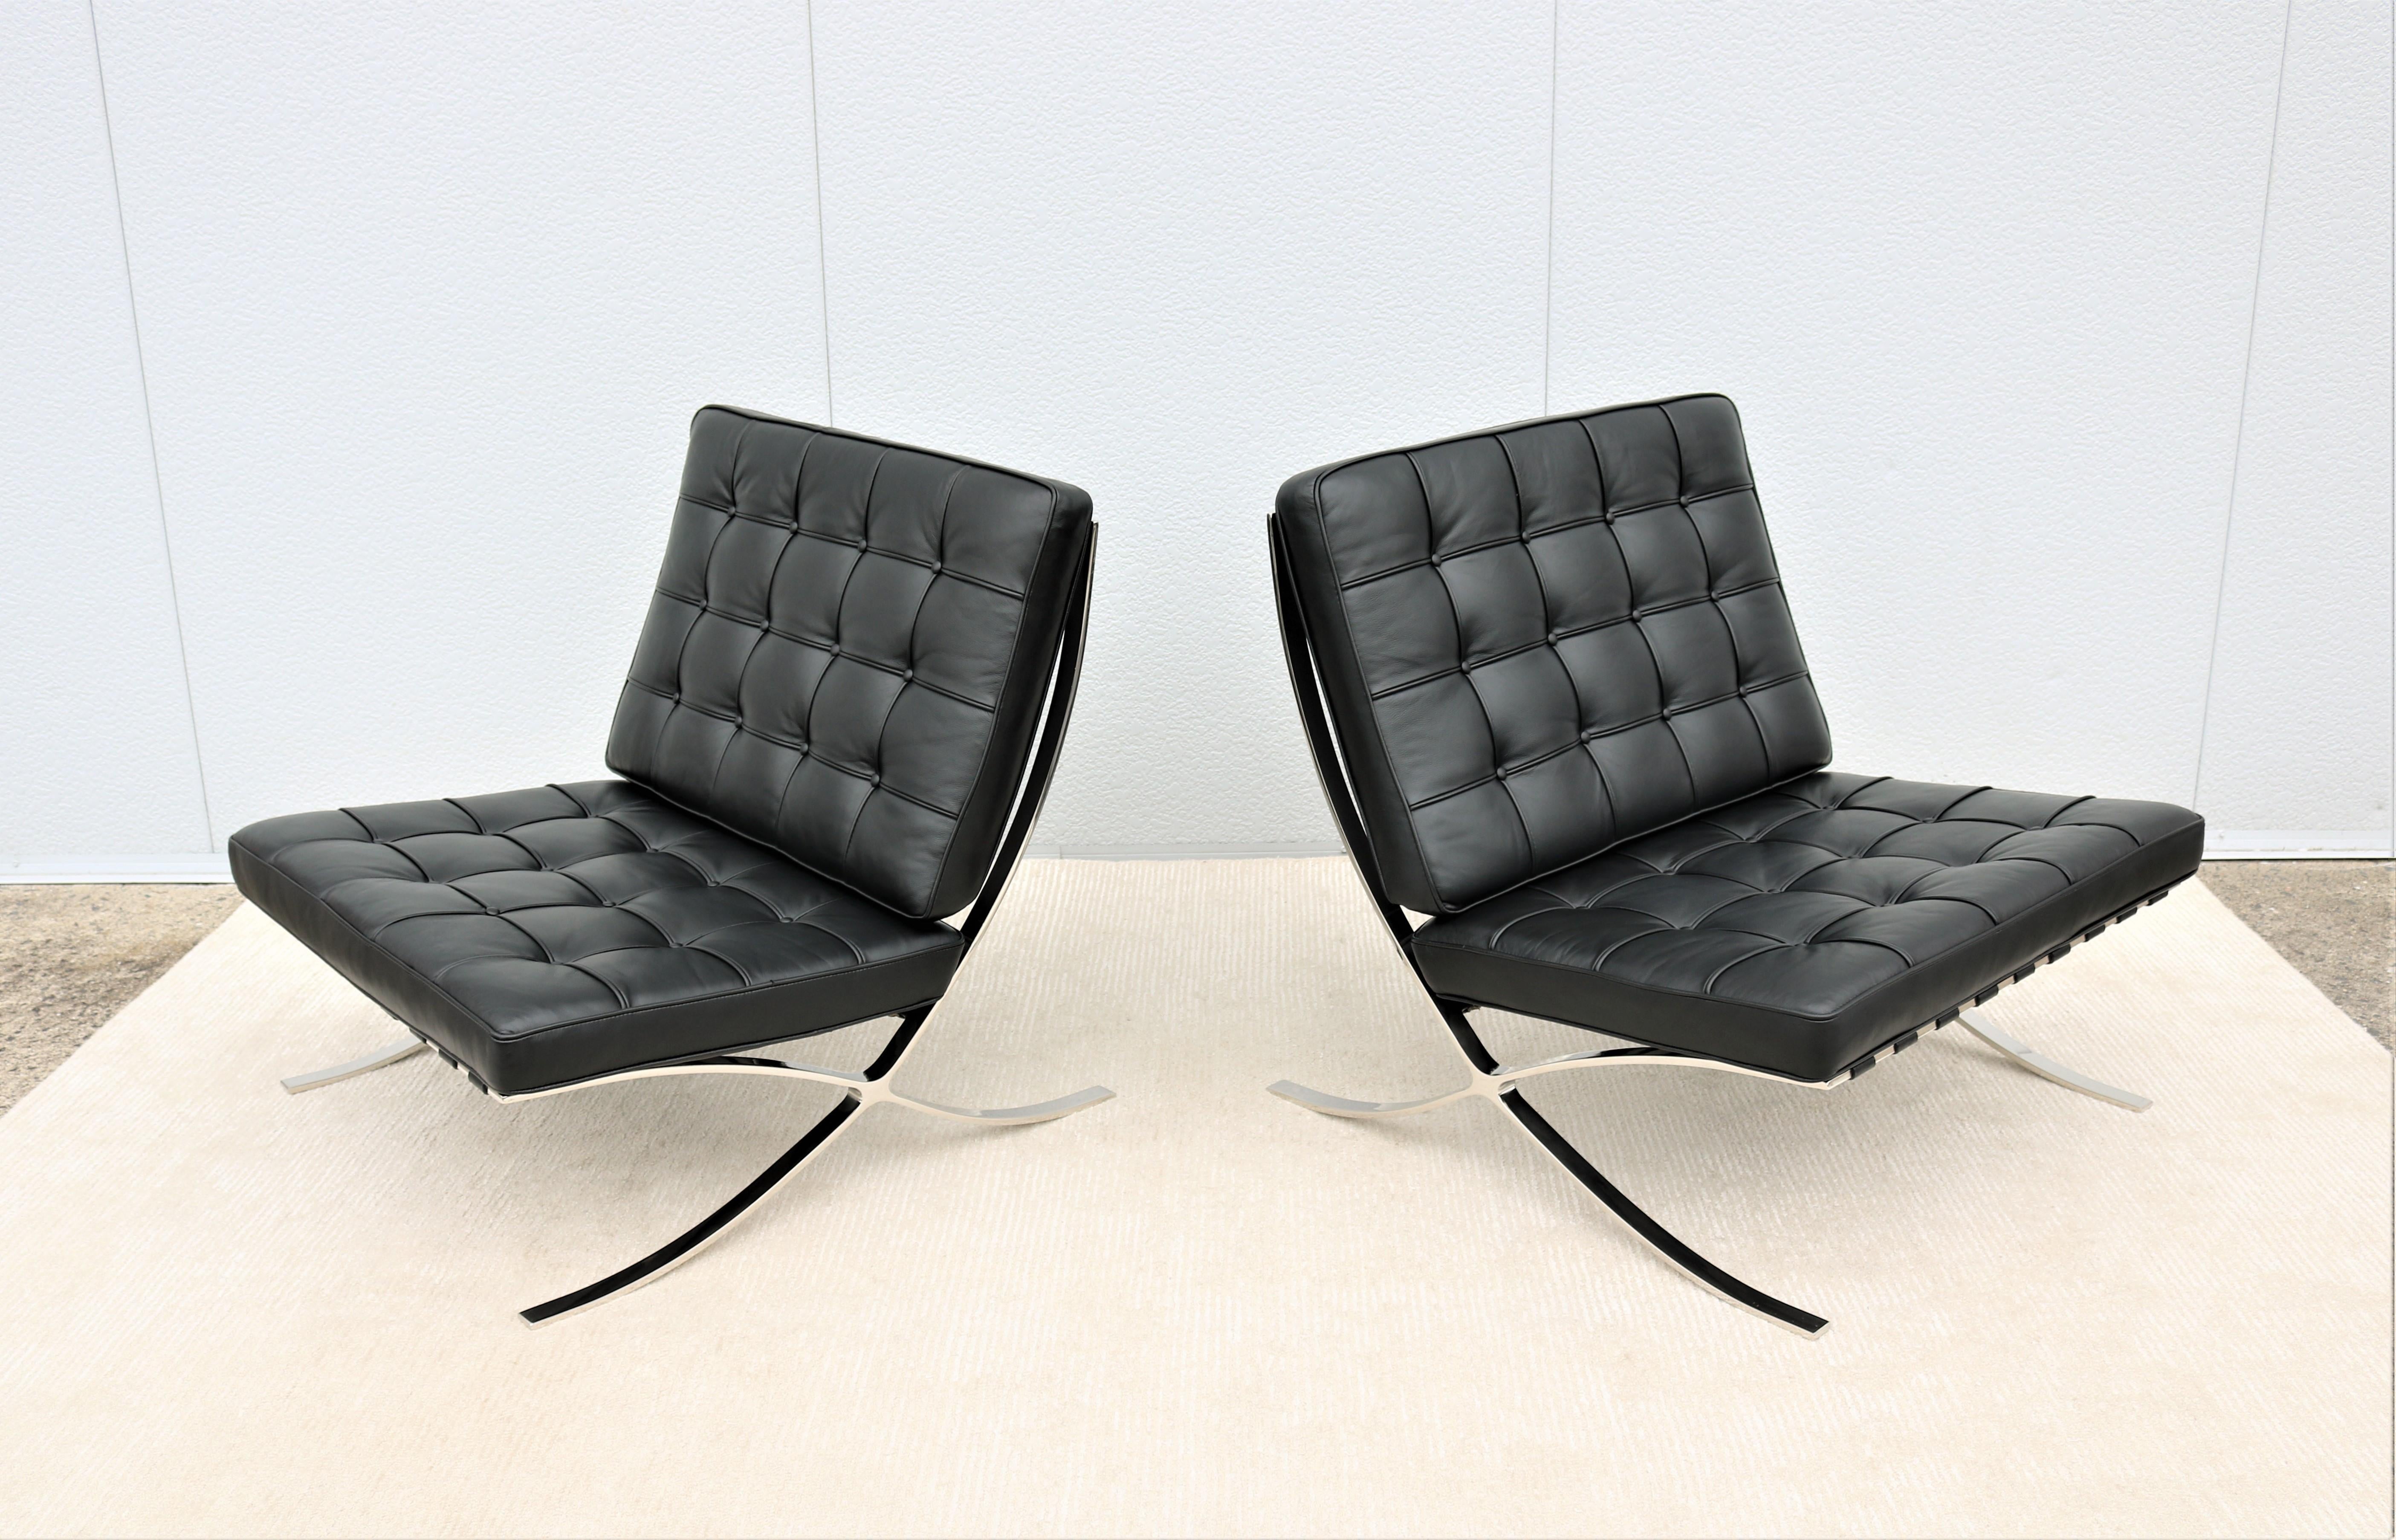 Fabulous pair of Barcelona chairs in black leather, feature highly desirable polished stainless-steel frames (notably more hand crafted than the chromed frame)
The classic Barcelona chair was exclusively designed by Mies van der Rohe for the German